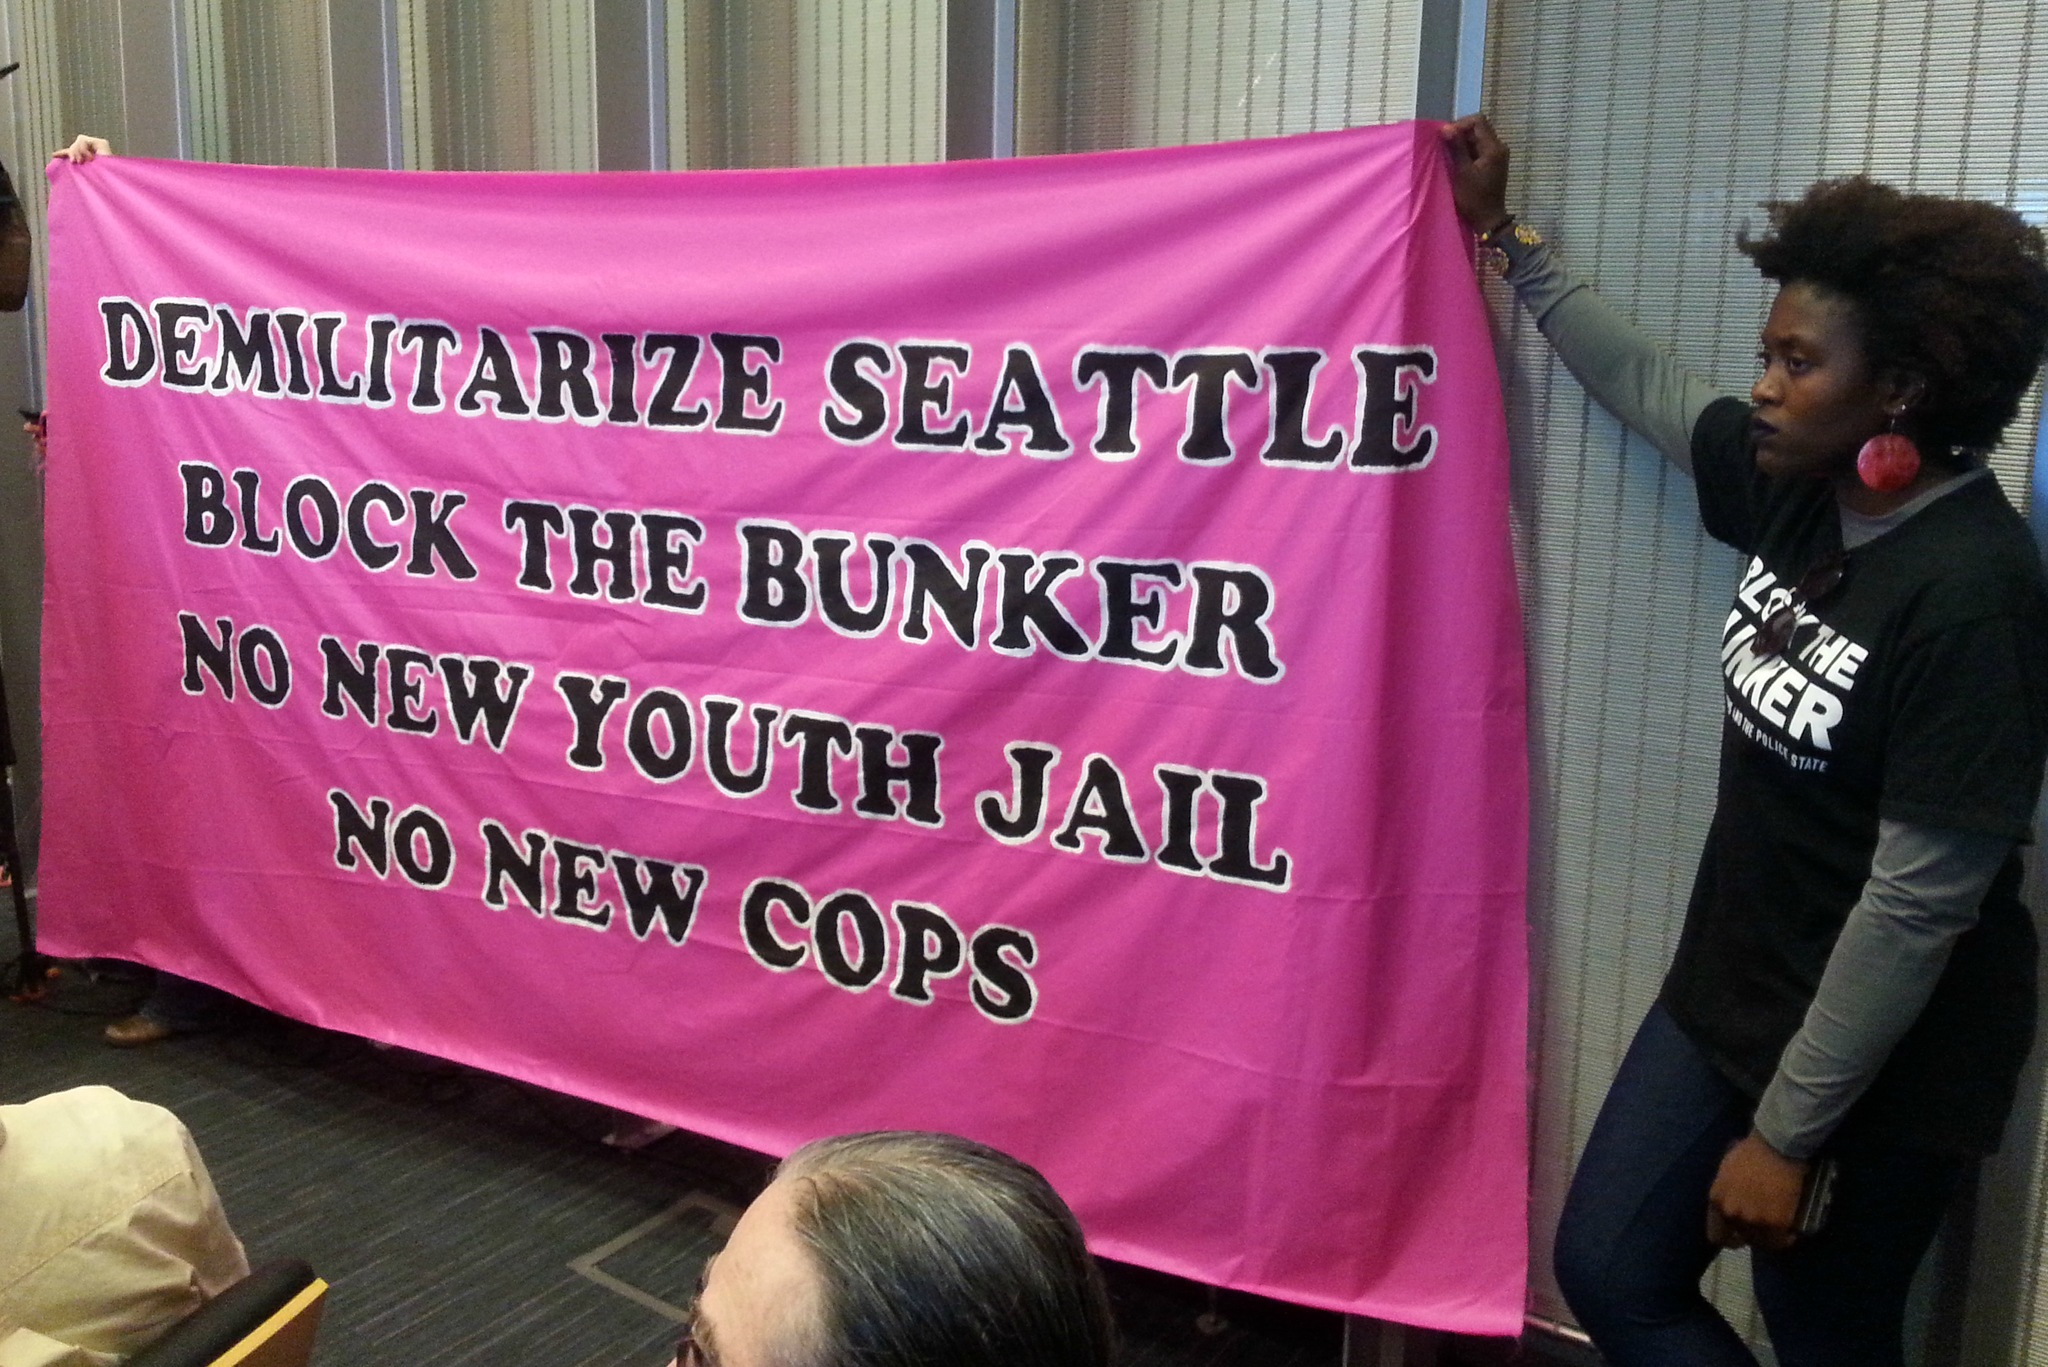 What’s Next for the No Youth Jail Movement?